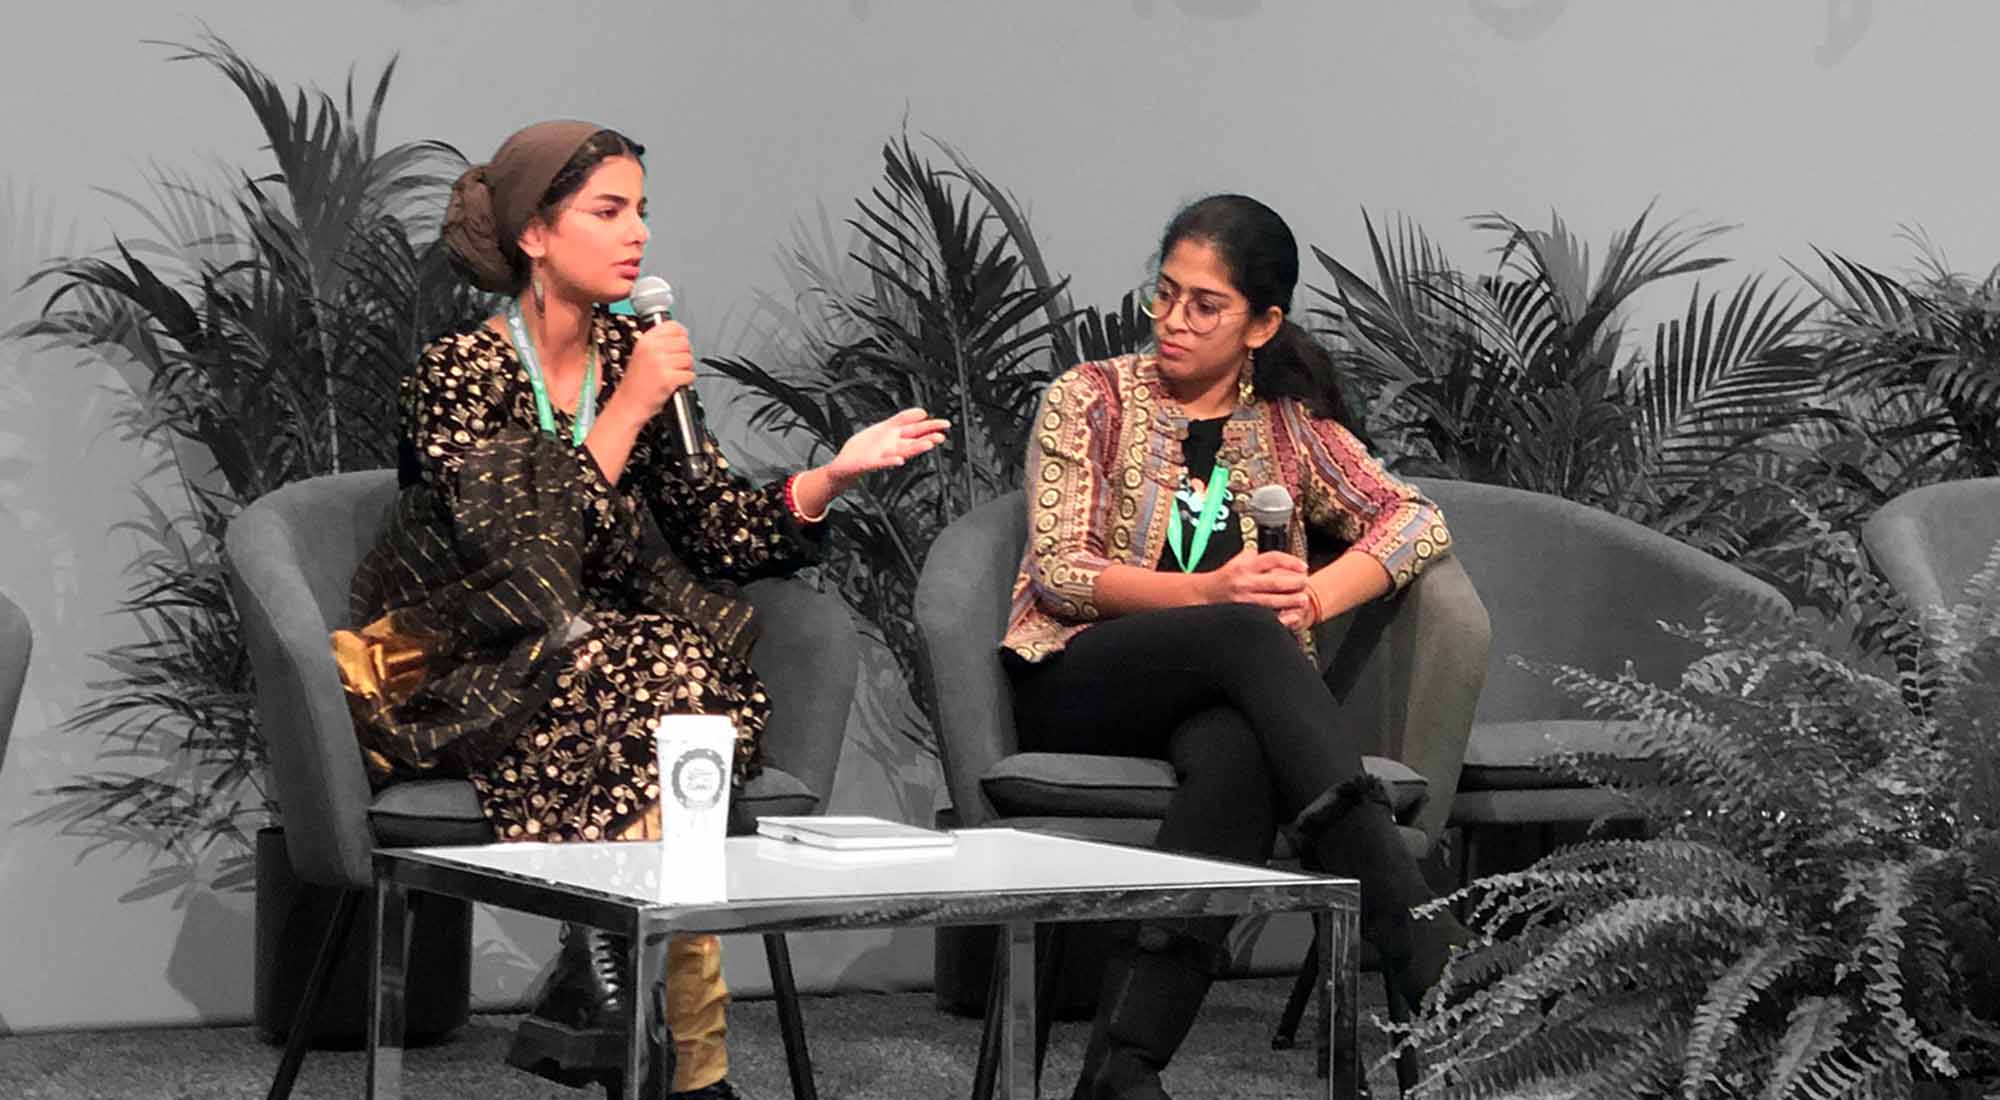 Two young women, Ayisha Siddiqa and Swetha Stotra Bashyam speaking on stage at the UN CBD COP 15 in Montreal, Canada, in 2022